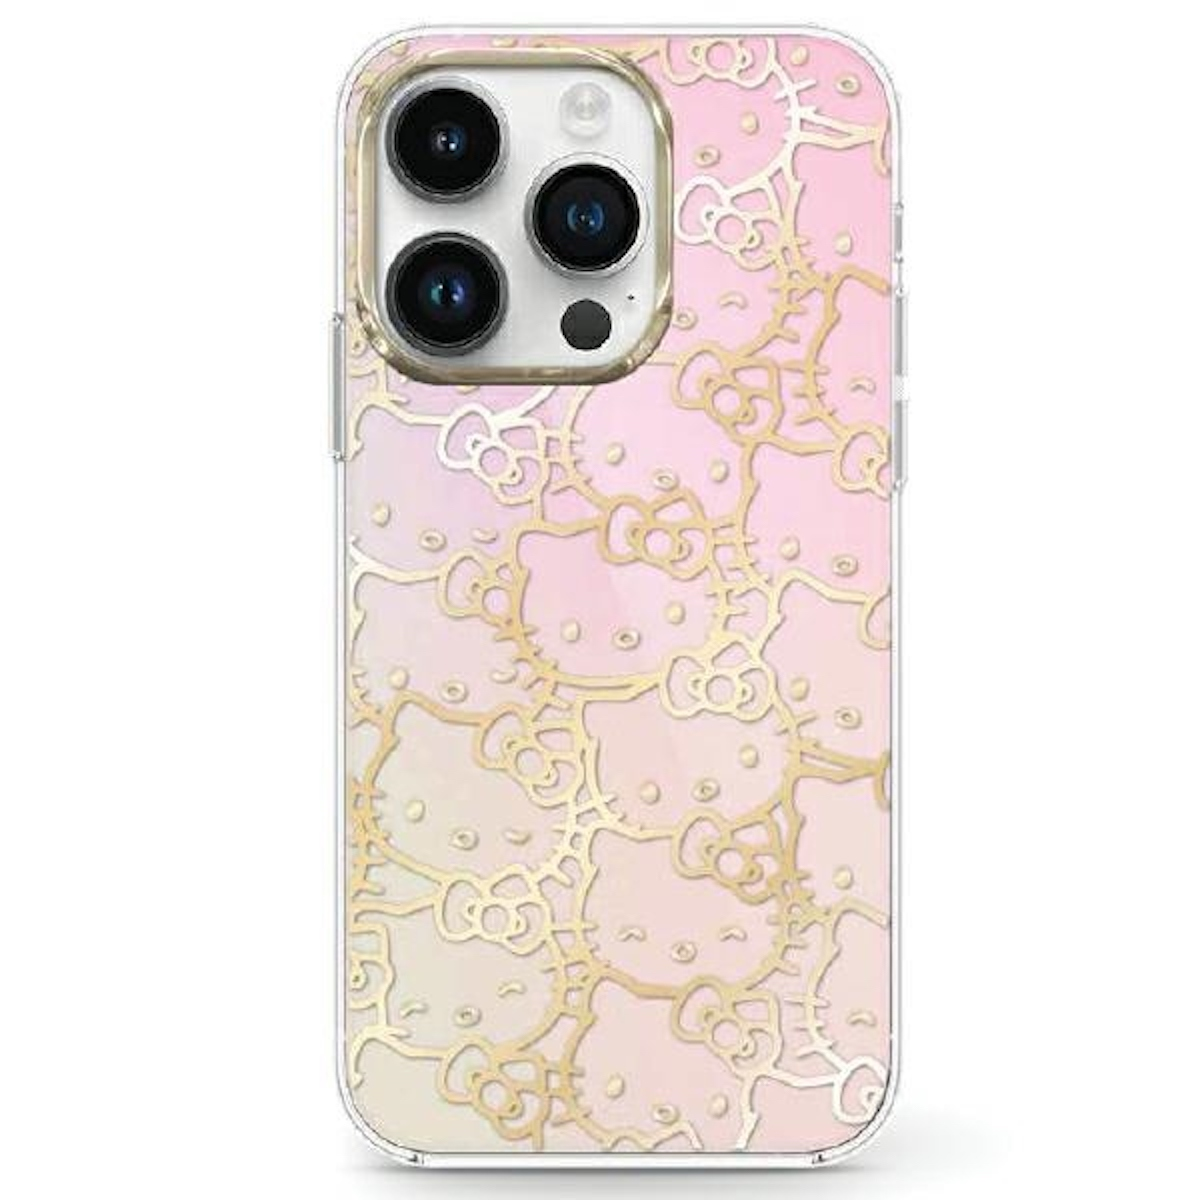 Backcover, CHEFMADE Design, Hardcase BY Apple, Rosa 15, KITTY HELLO Schutzhülle Cover iPhone Cover Silikon